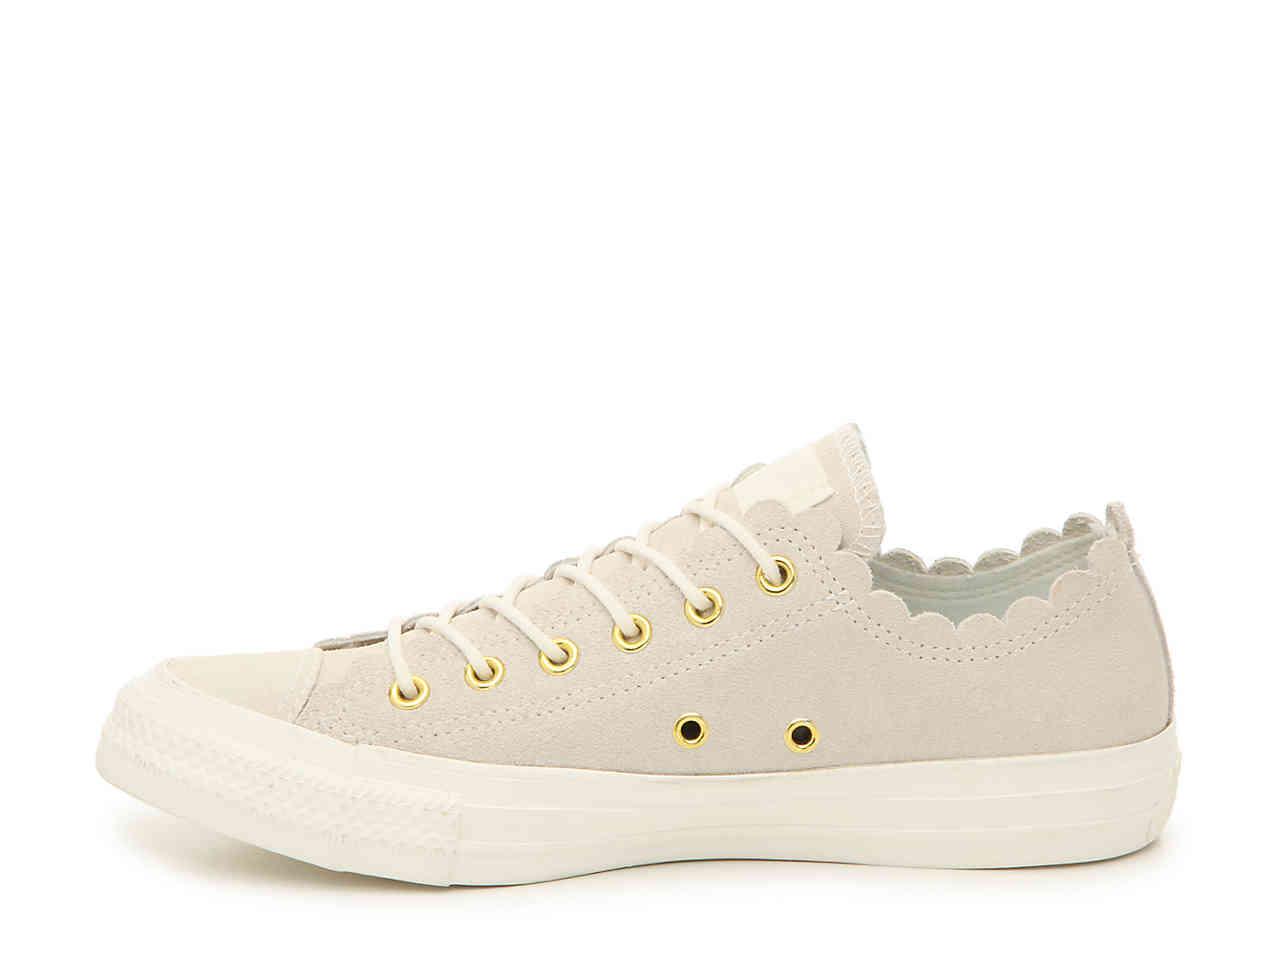 Converse Chuck Taylor All Star Scallop Sneaker in White | Lyst